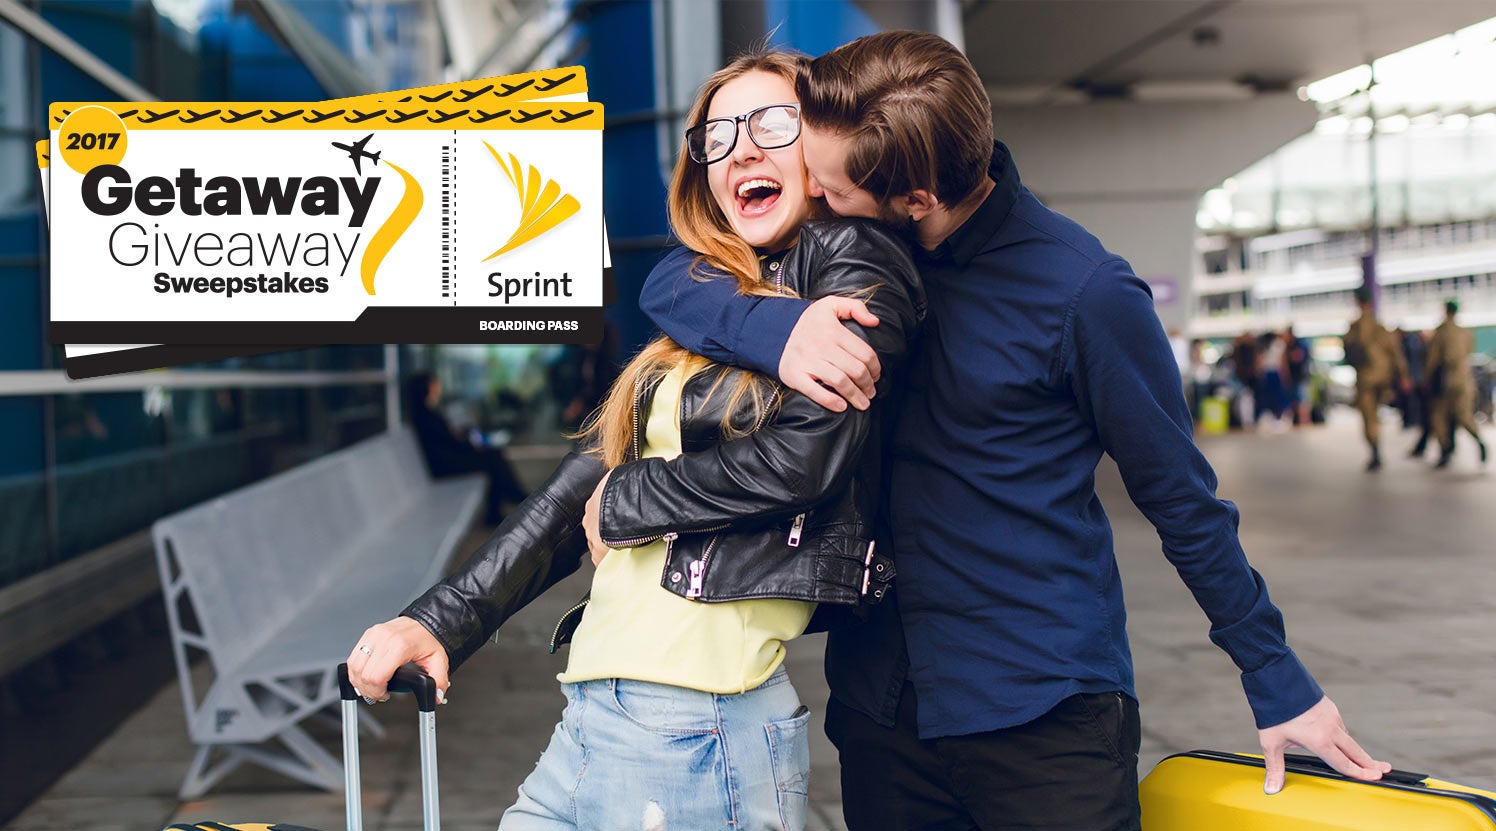 Sprint's new sweepstakes promo gives customers a chance to take flight and get away